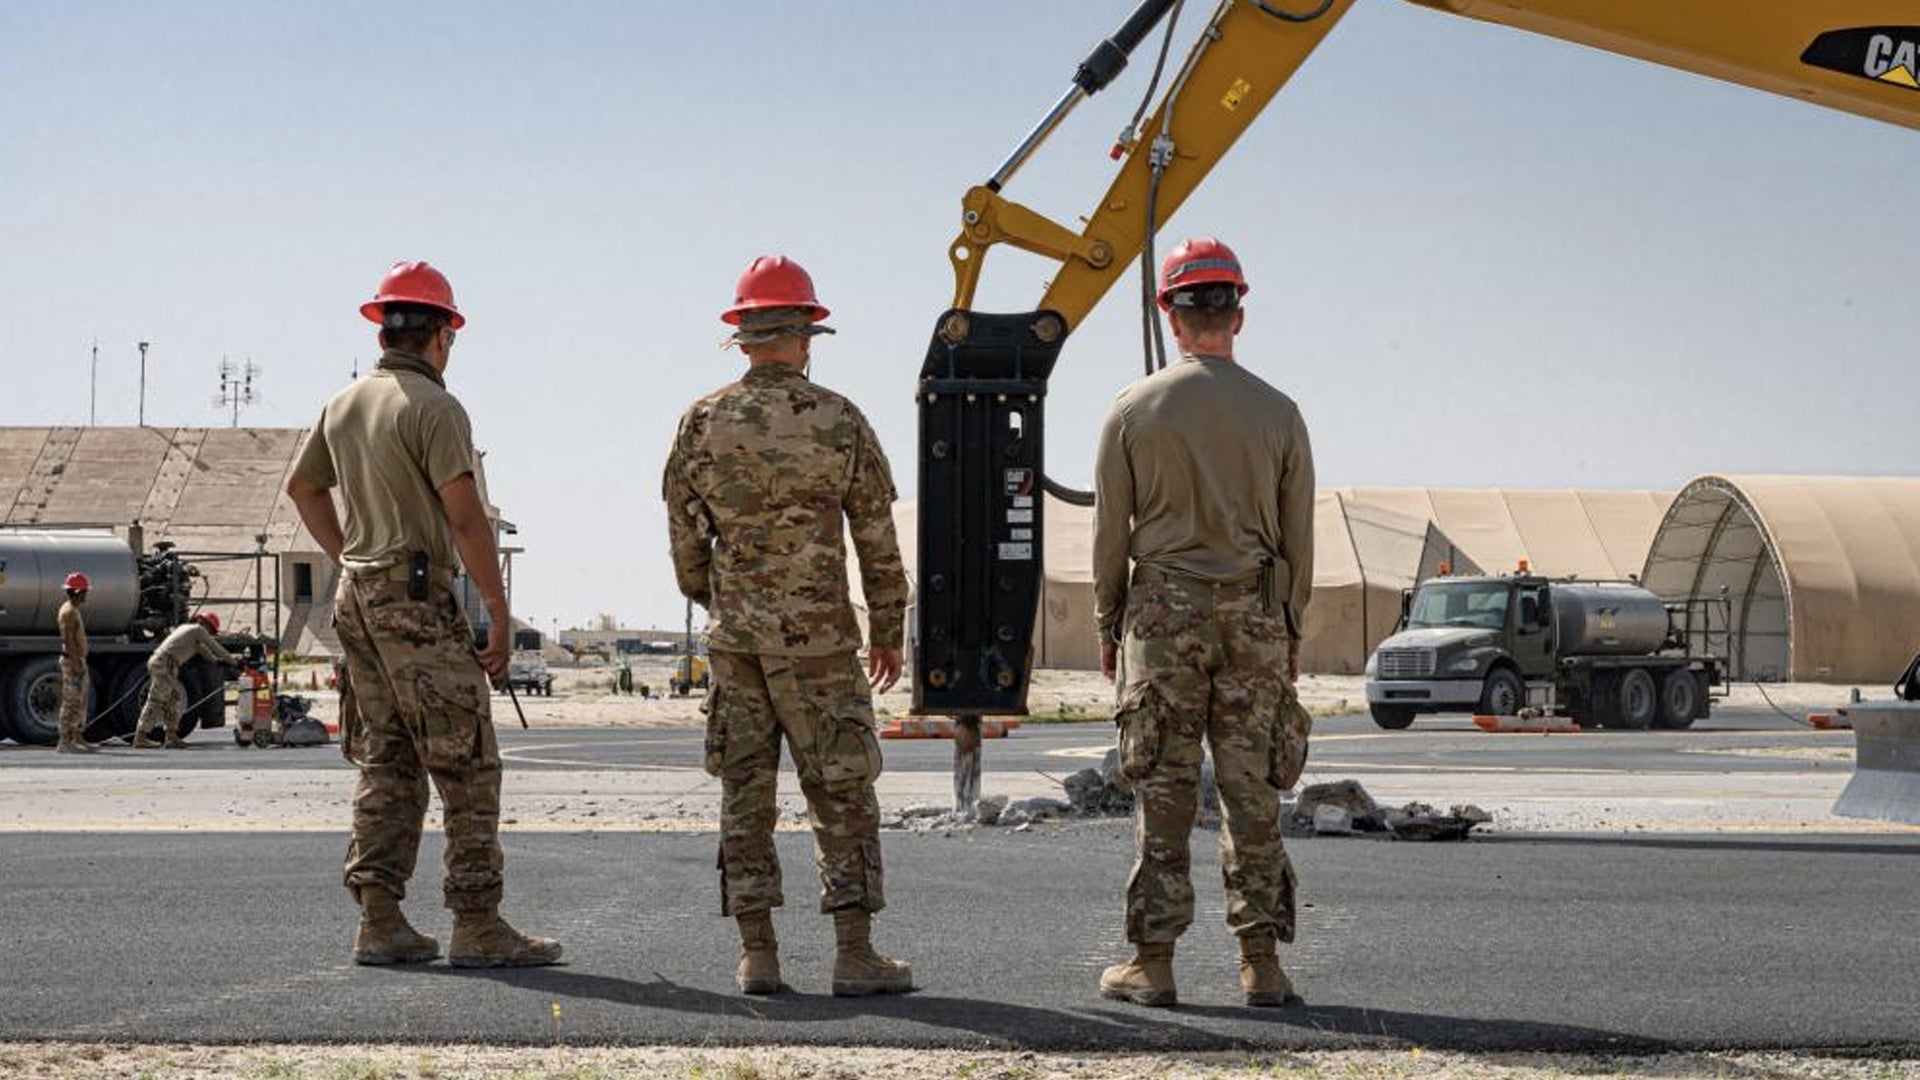 U.S. Air Force Tech. Sgt. Julio Duran Sangabriel, left, Master Sgt. Michael Rael, project manager, and 1st Lt. Kyle Price, a design engineer, with the 557th Expeditionary Rapid Engineer Deployable Heavy Operational Repair Squadron Engineer Squadron, or RED HORSE, oversee the drilling of concrete of a taxiway at Ali Al Salem Air Base, Kuwait, Feb. 22, 2022 (Senior Airman Natalie Filzen / U.S. Air Force)